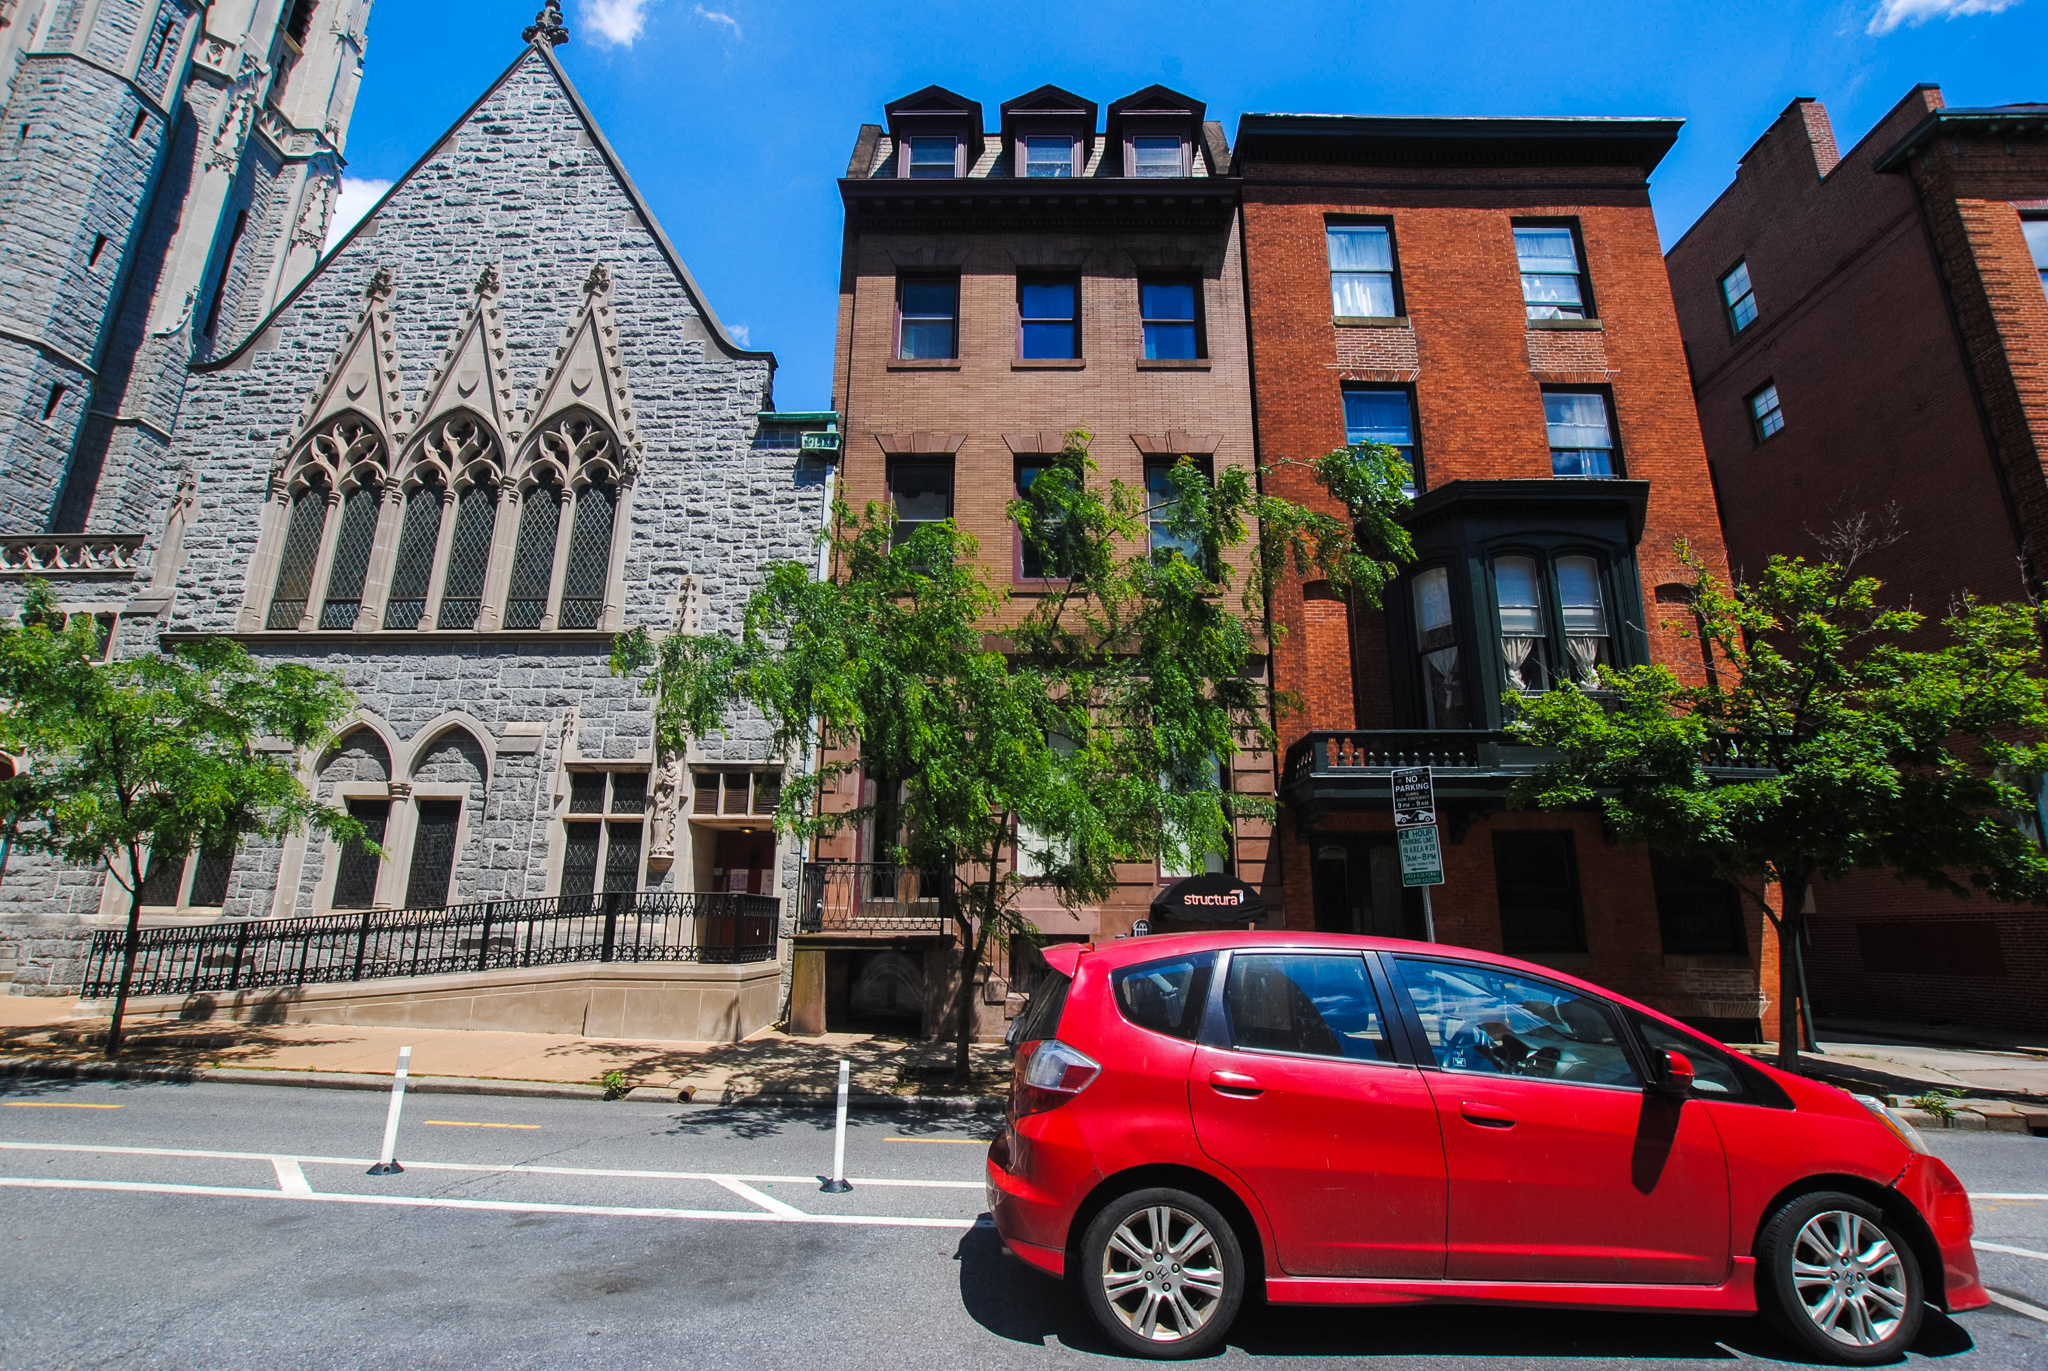 809 Cathedral St. : 6 Apartments/ 2 Office Spaces in the Heart of Historic Mt. Vernon